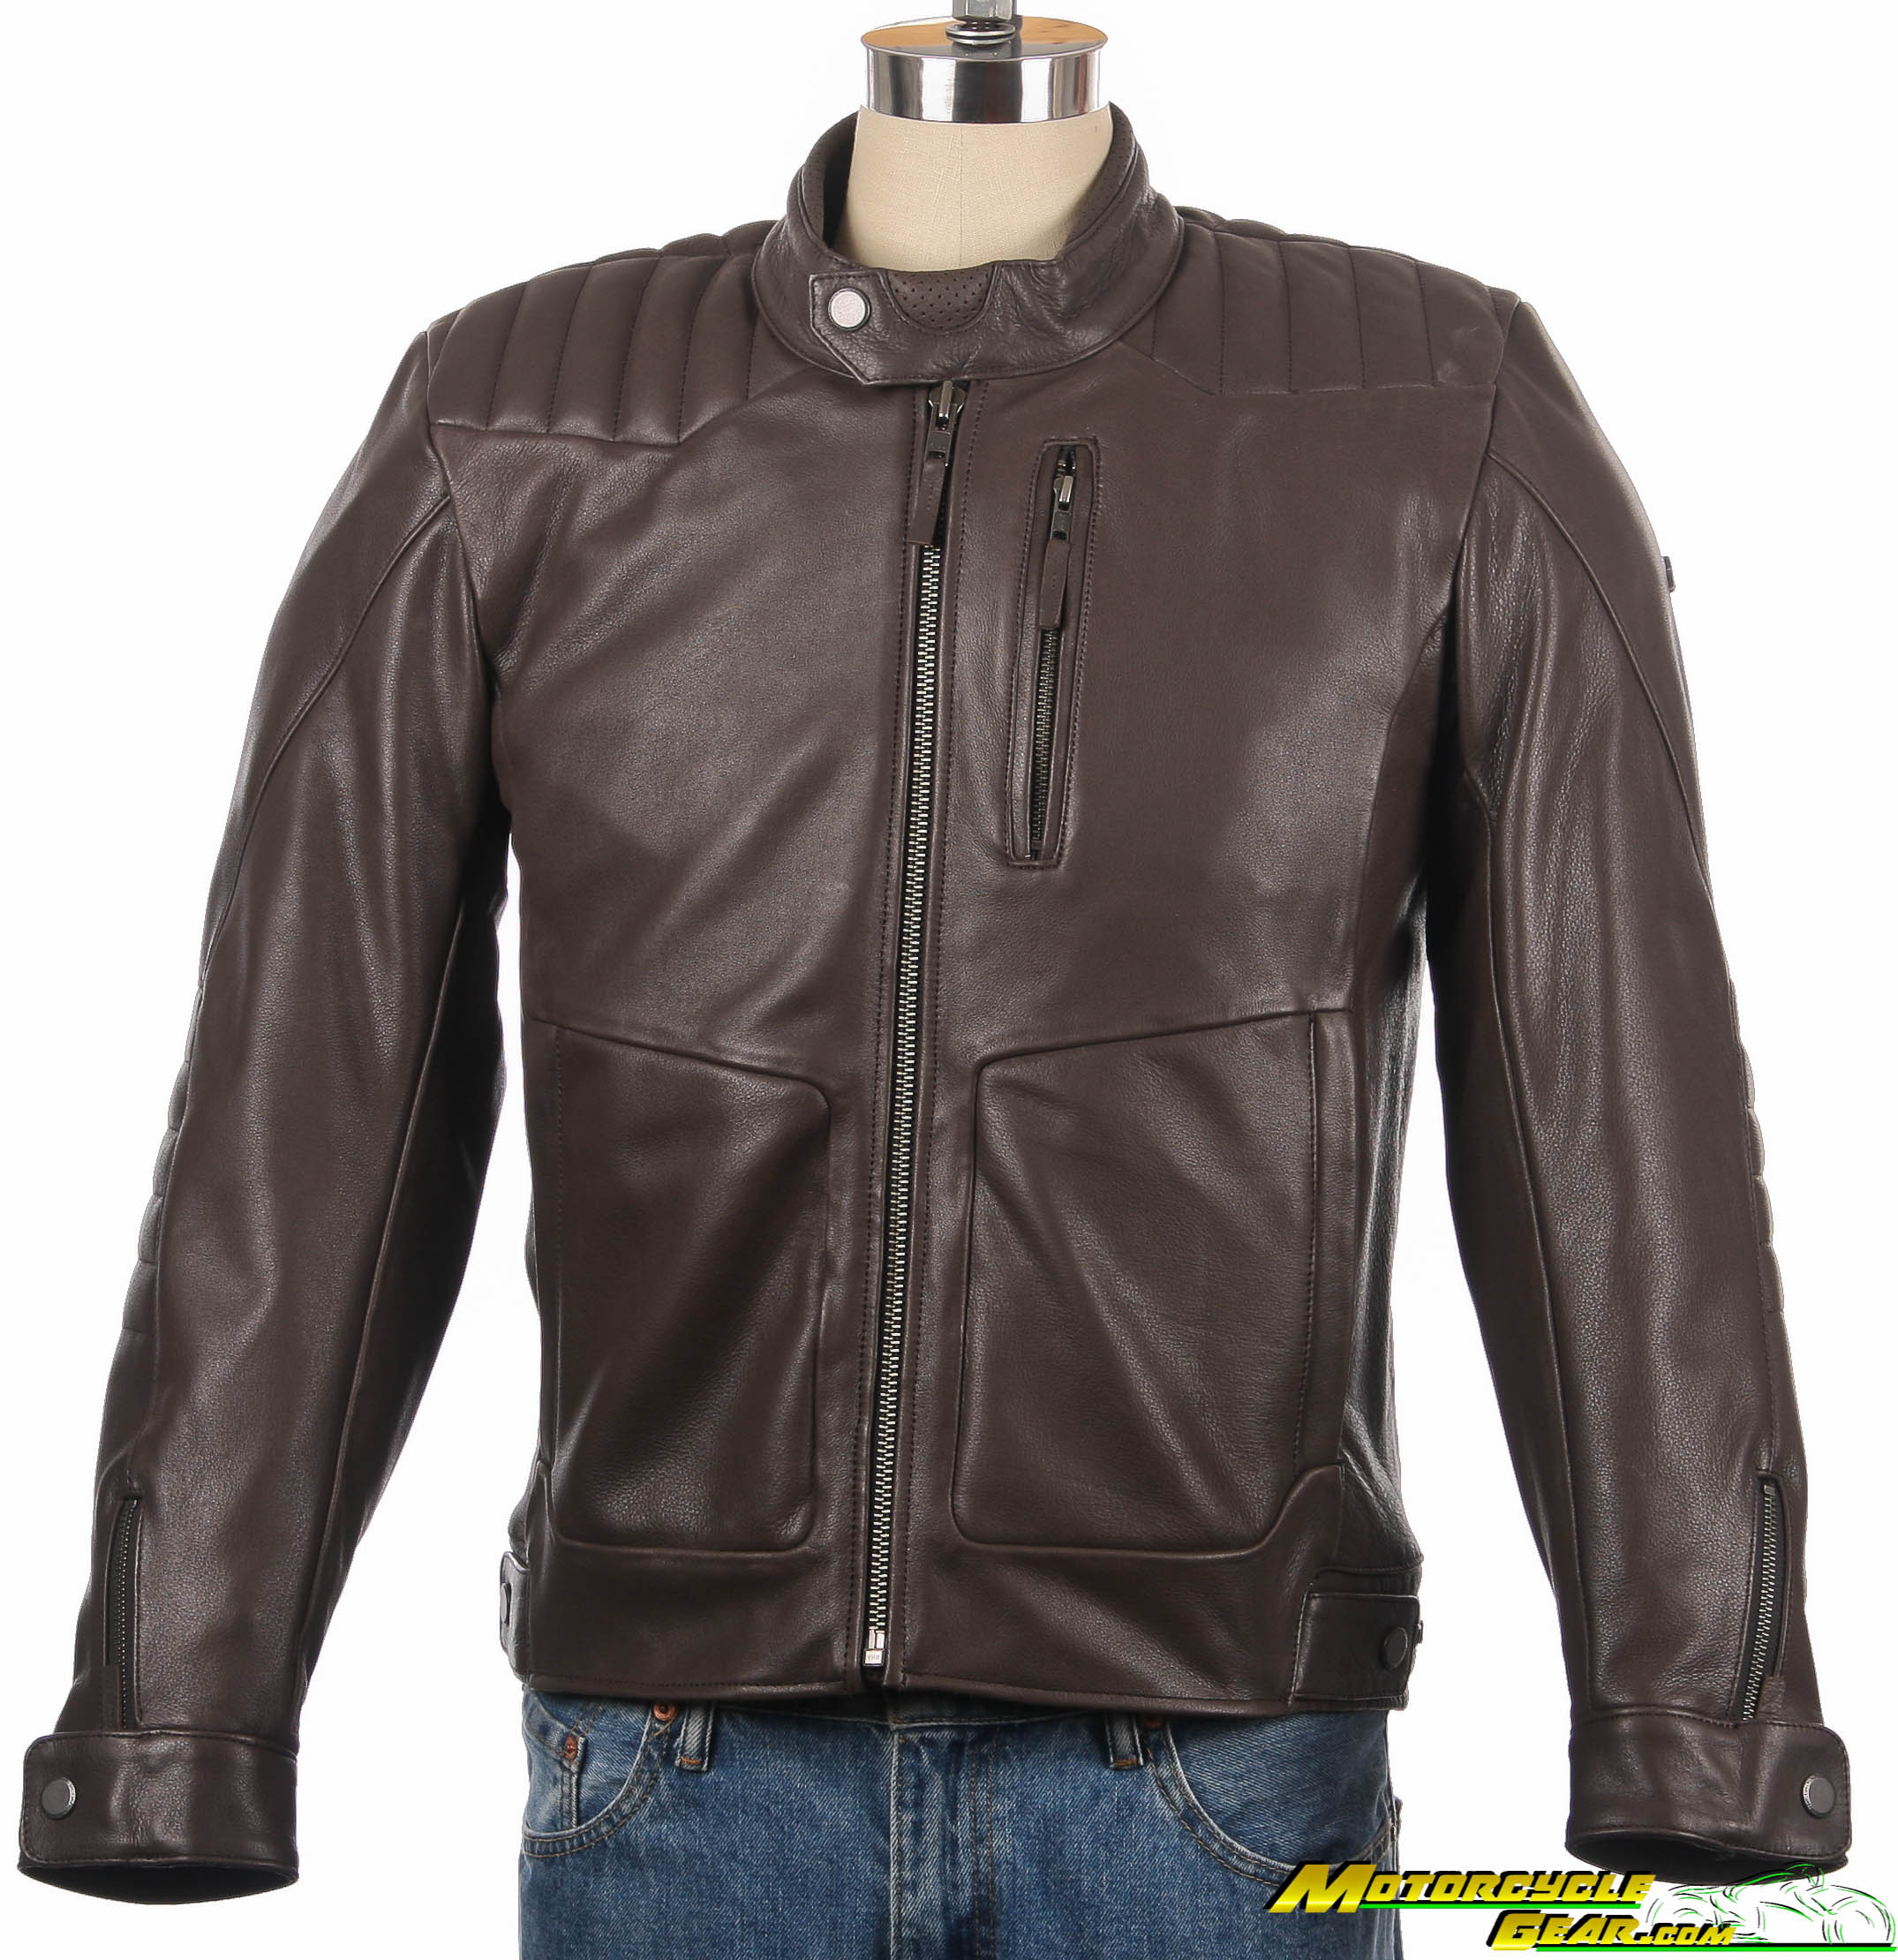 Viewing Images For Alpinestars Crazy Eight Jacket :: MotorcycleGear.com